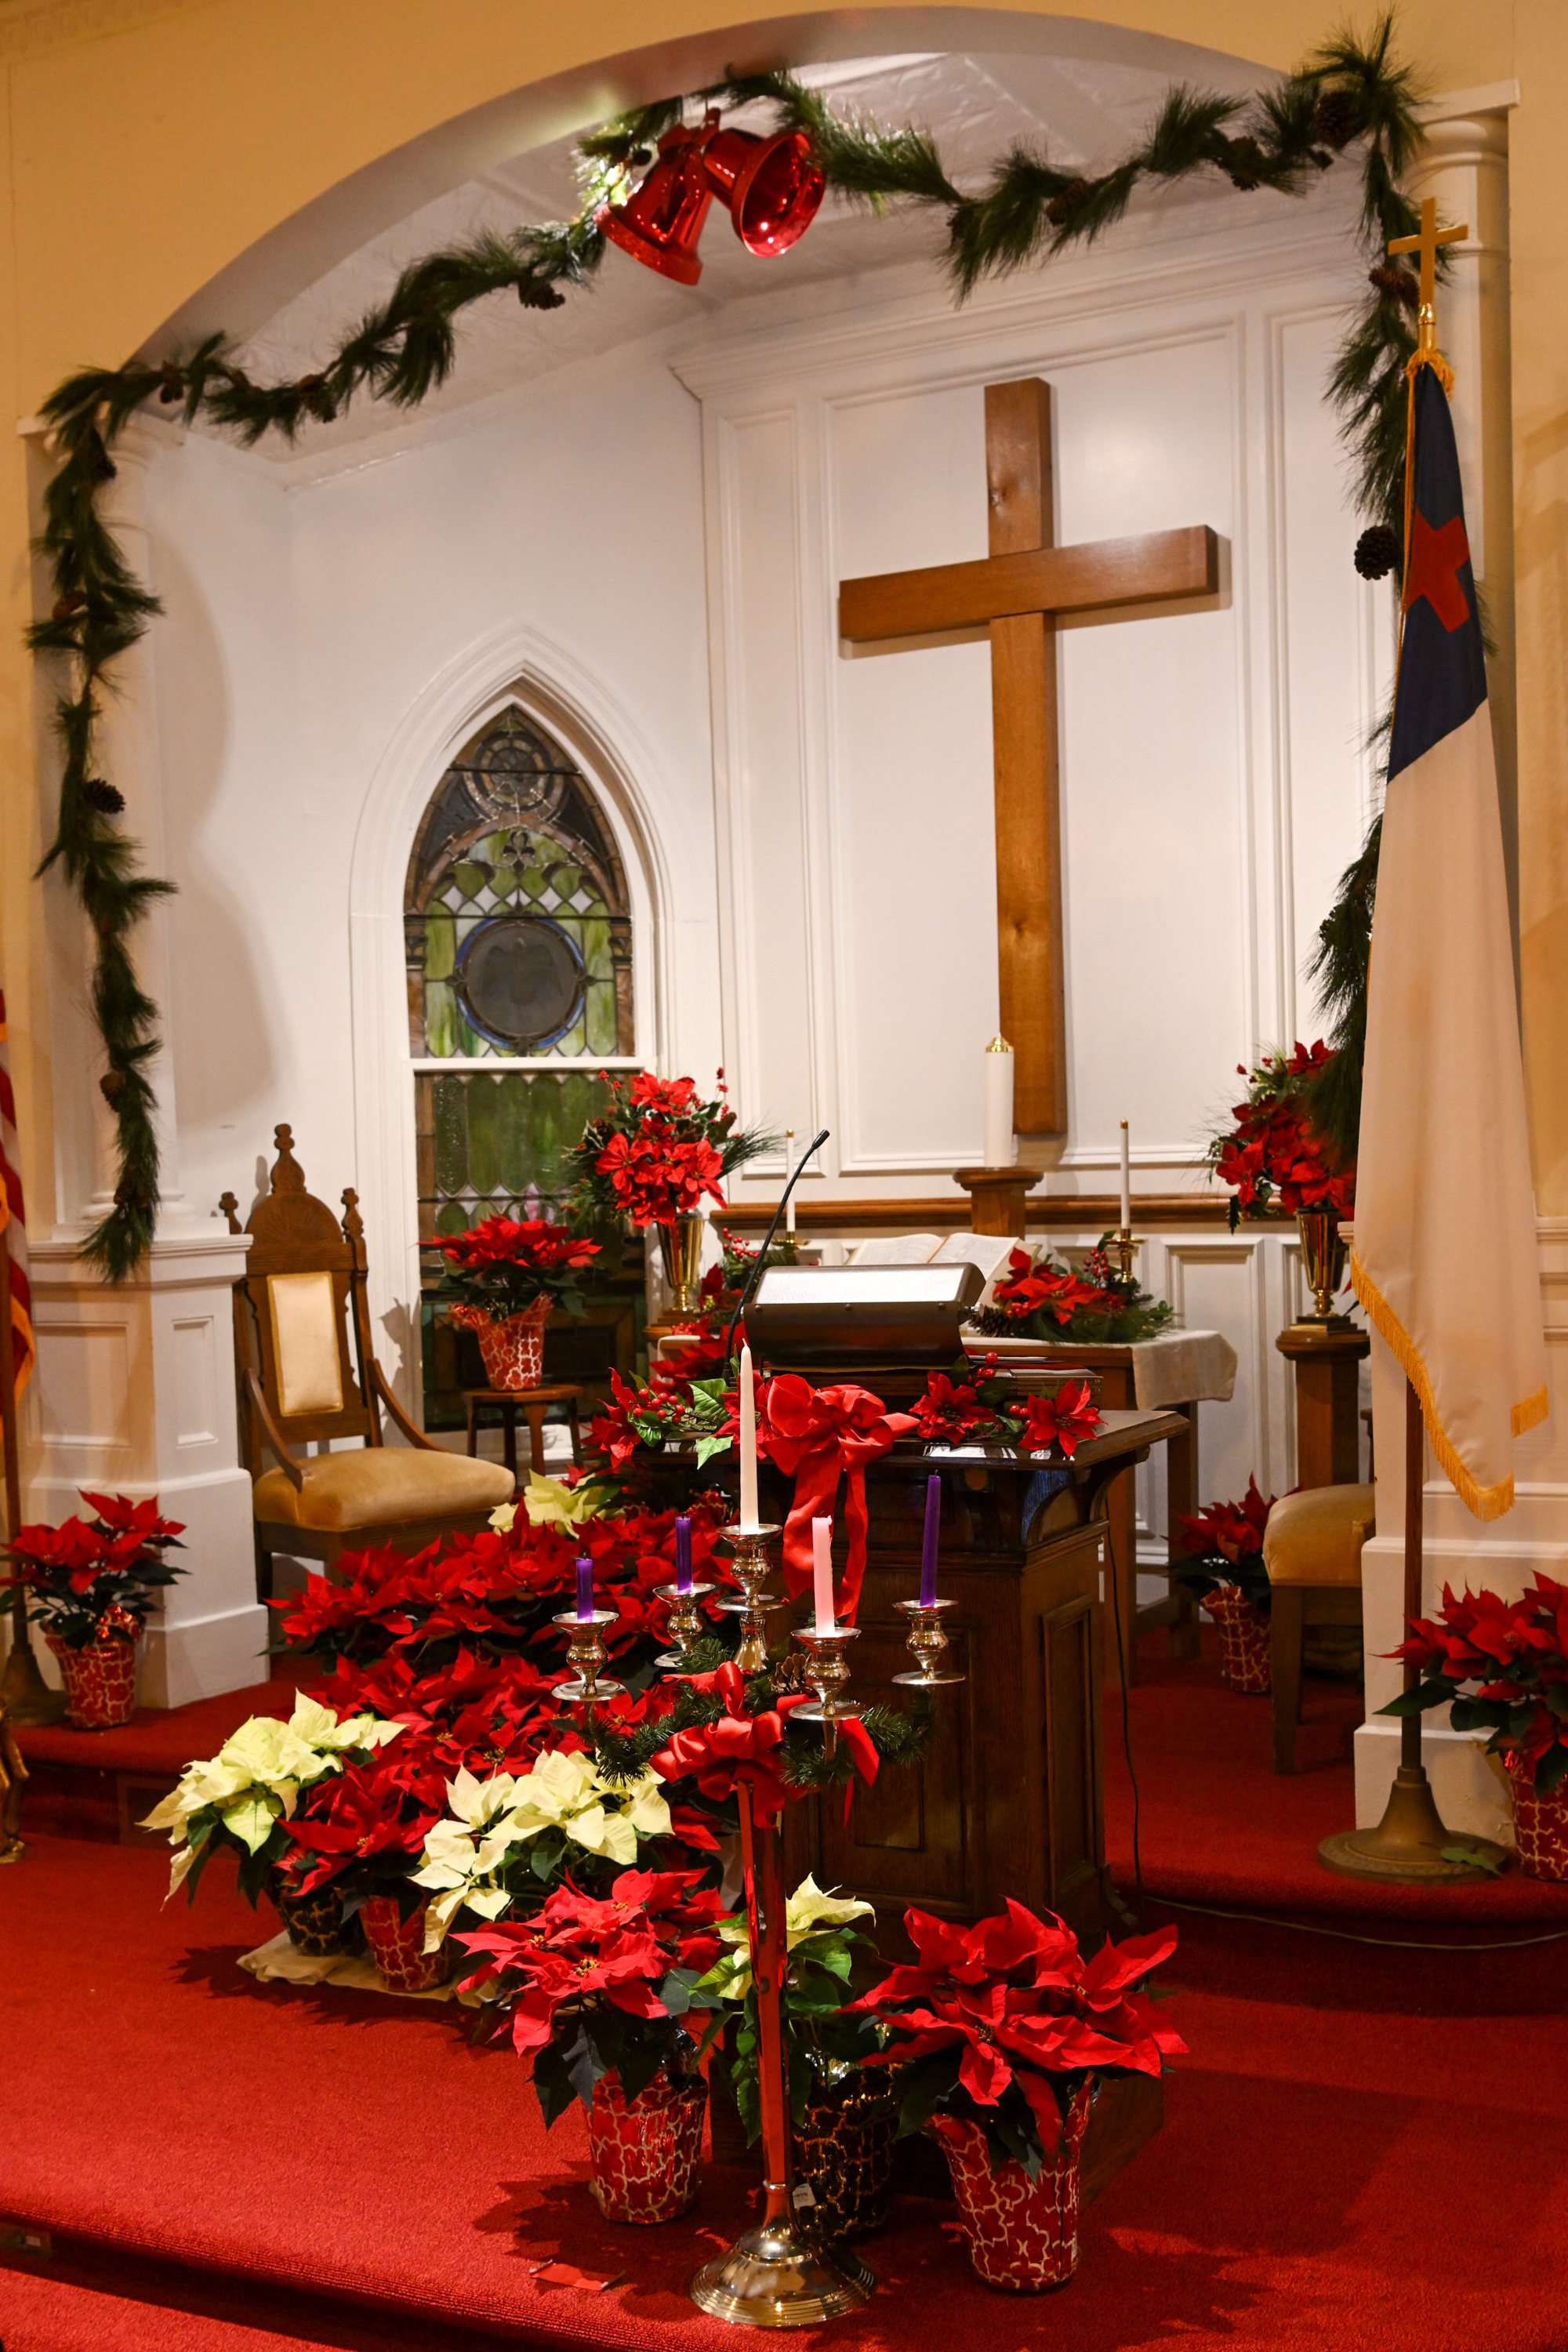 Wesley Grove Sanctuary at Christmas